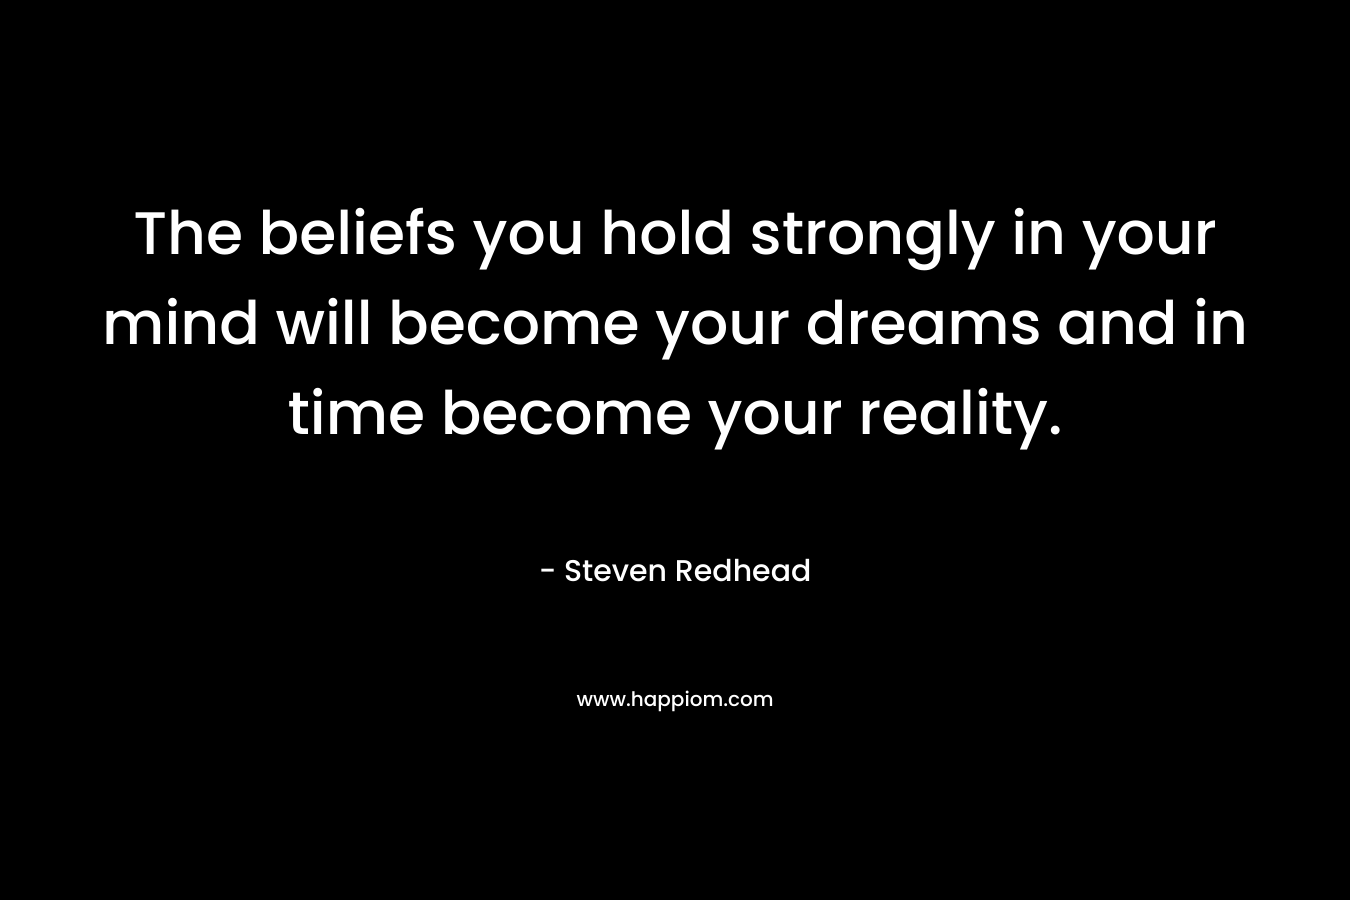 The beliefs you hold strongly in your mind will become your dreams and in time become your reality.